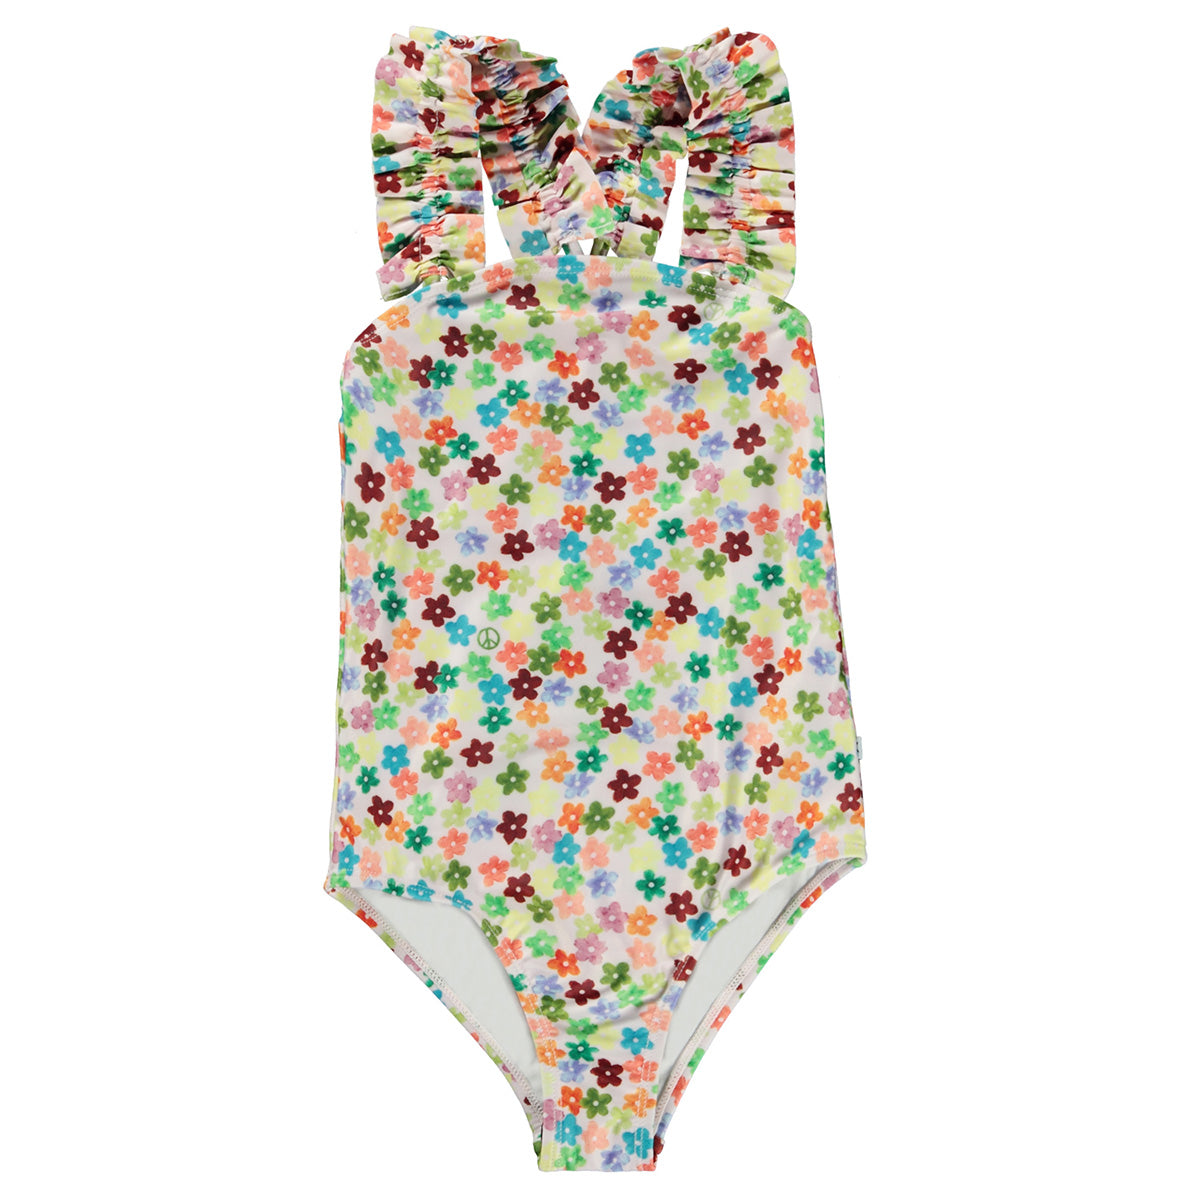 The Nitika Swimsuit from Molo. Swimsuit in an all over print of small flowers in various colors